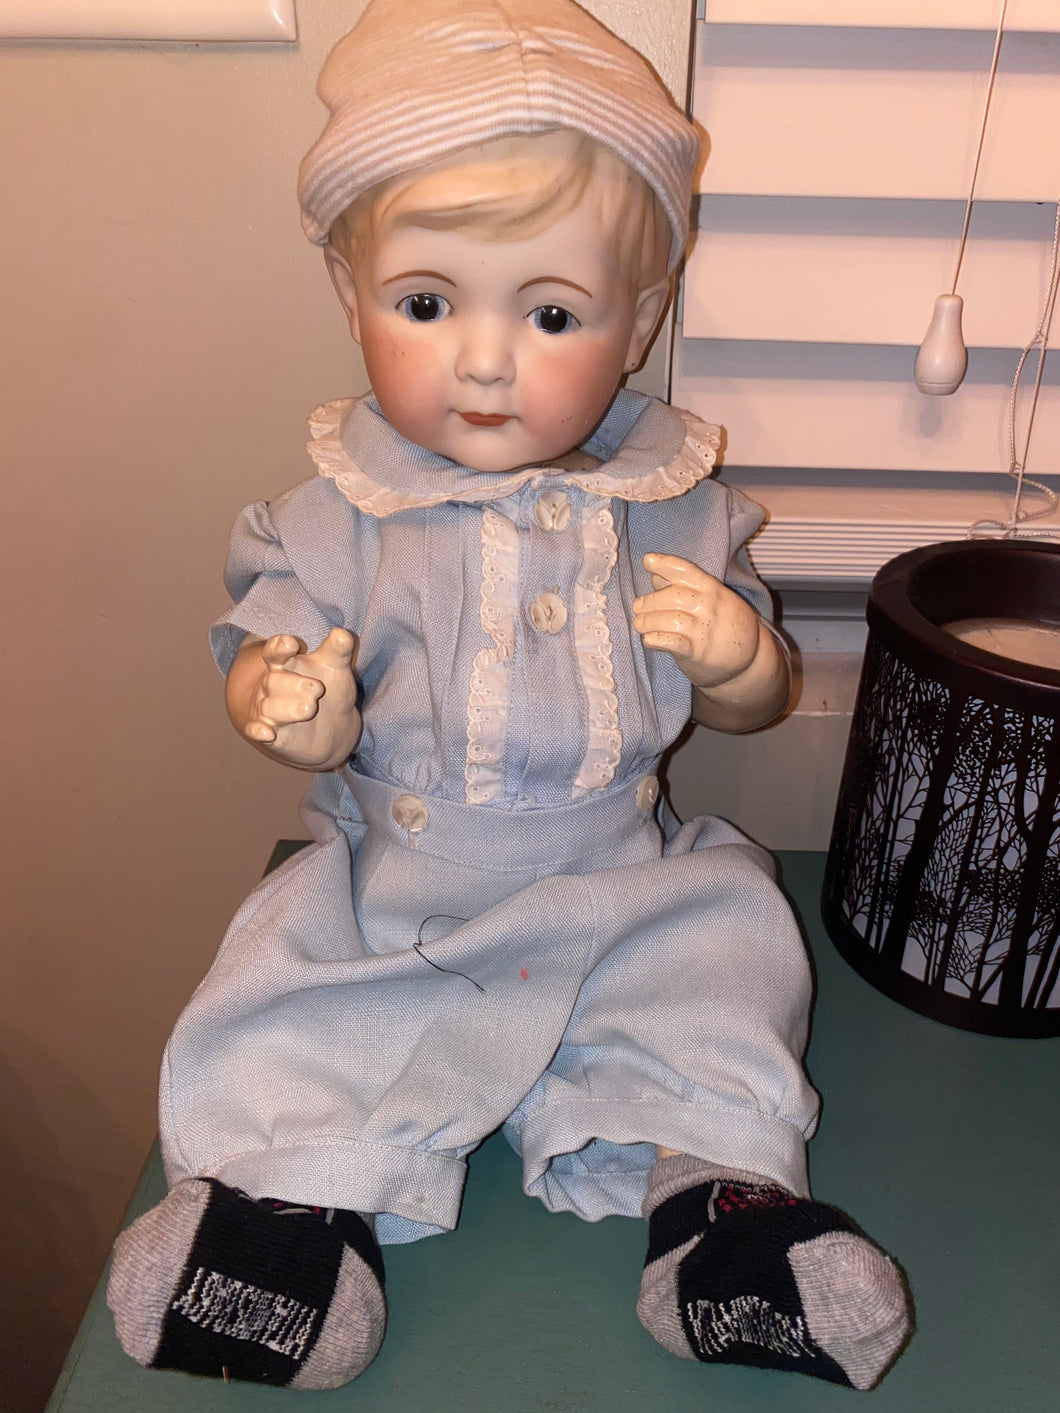 Sweetest 7 months old ~ antique - heavy vessel